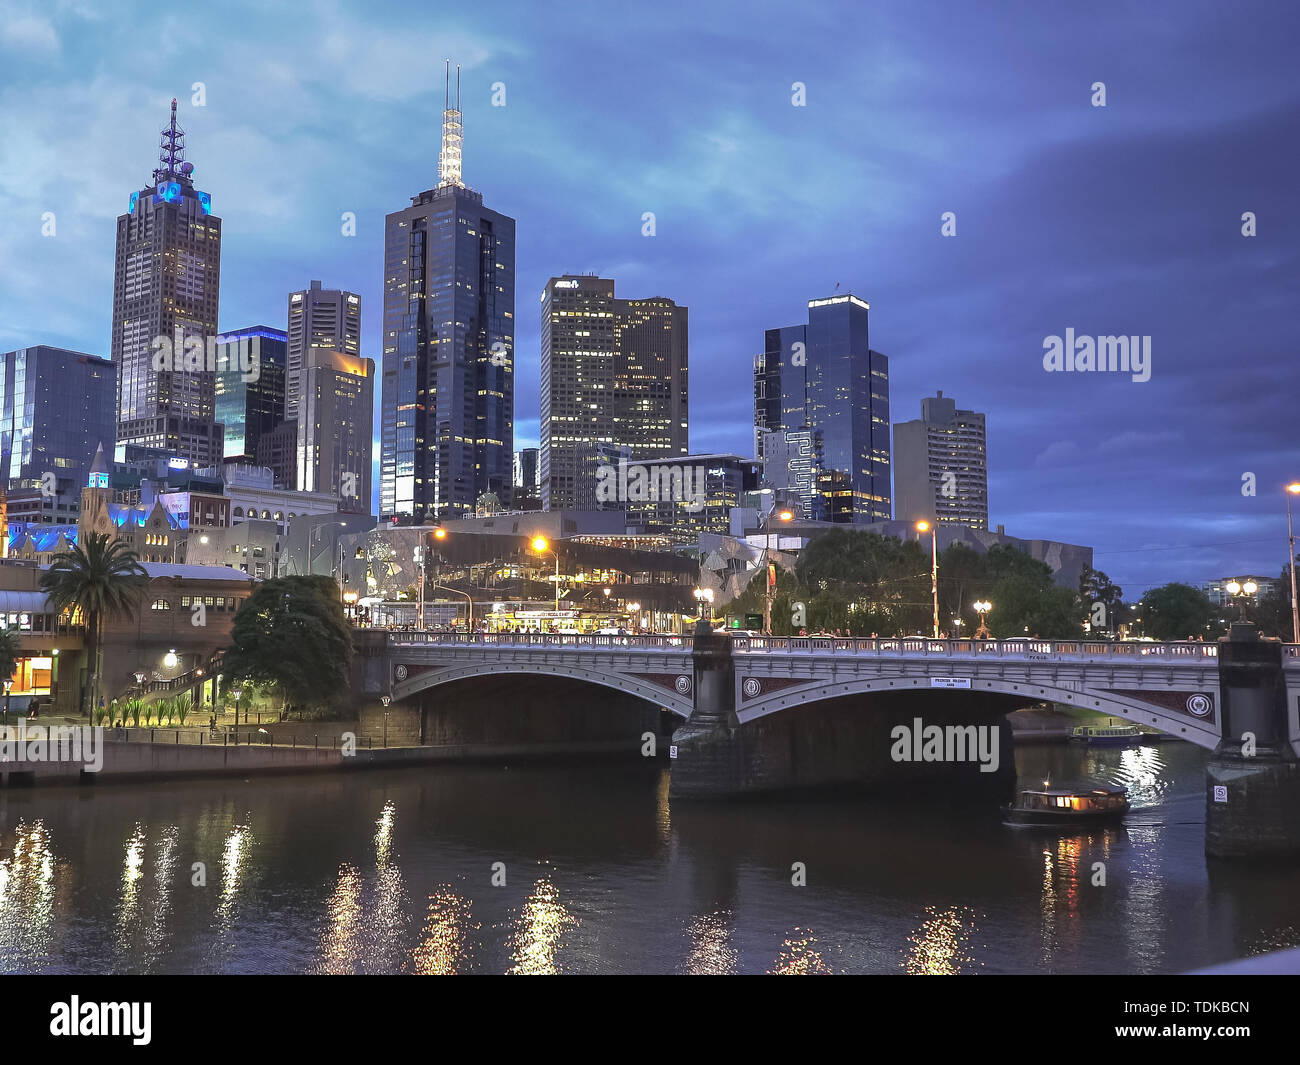 MELBOURNE, AUSTRALIA-NOVEMBER, 12, 2016: night shot of a ferry passing under a bridge on melbourne's yarra river in the australian state of victoria Stock Photo